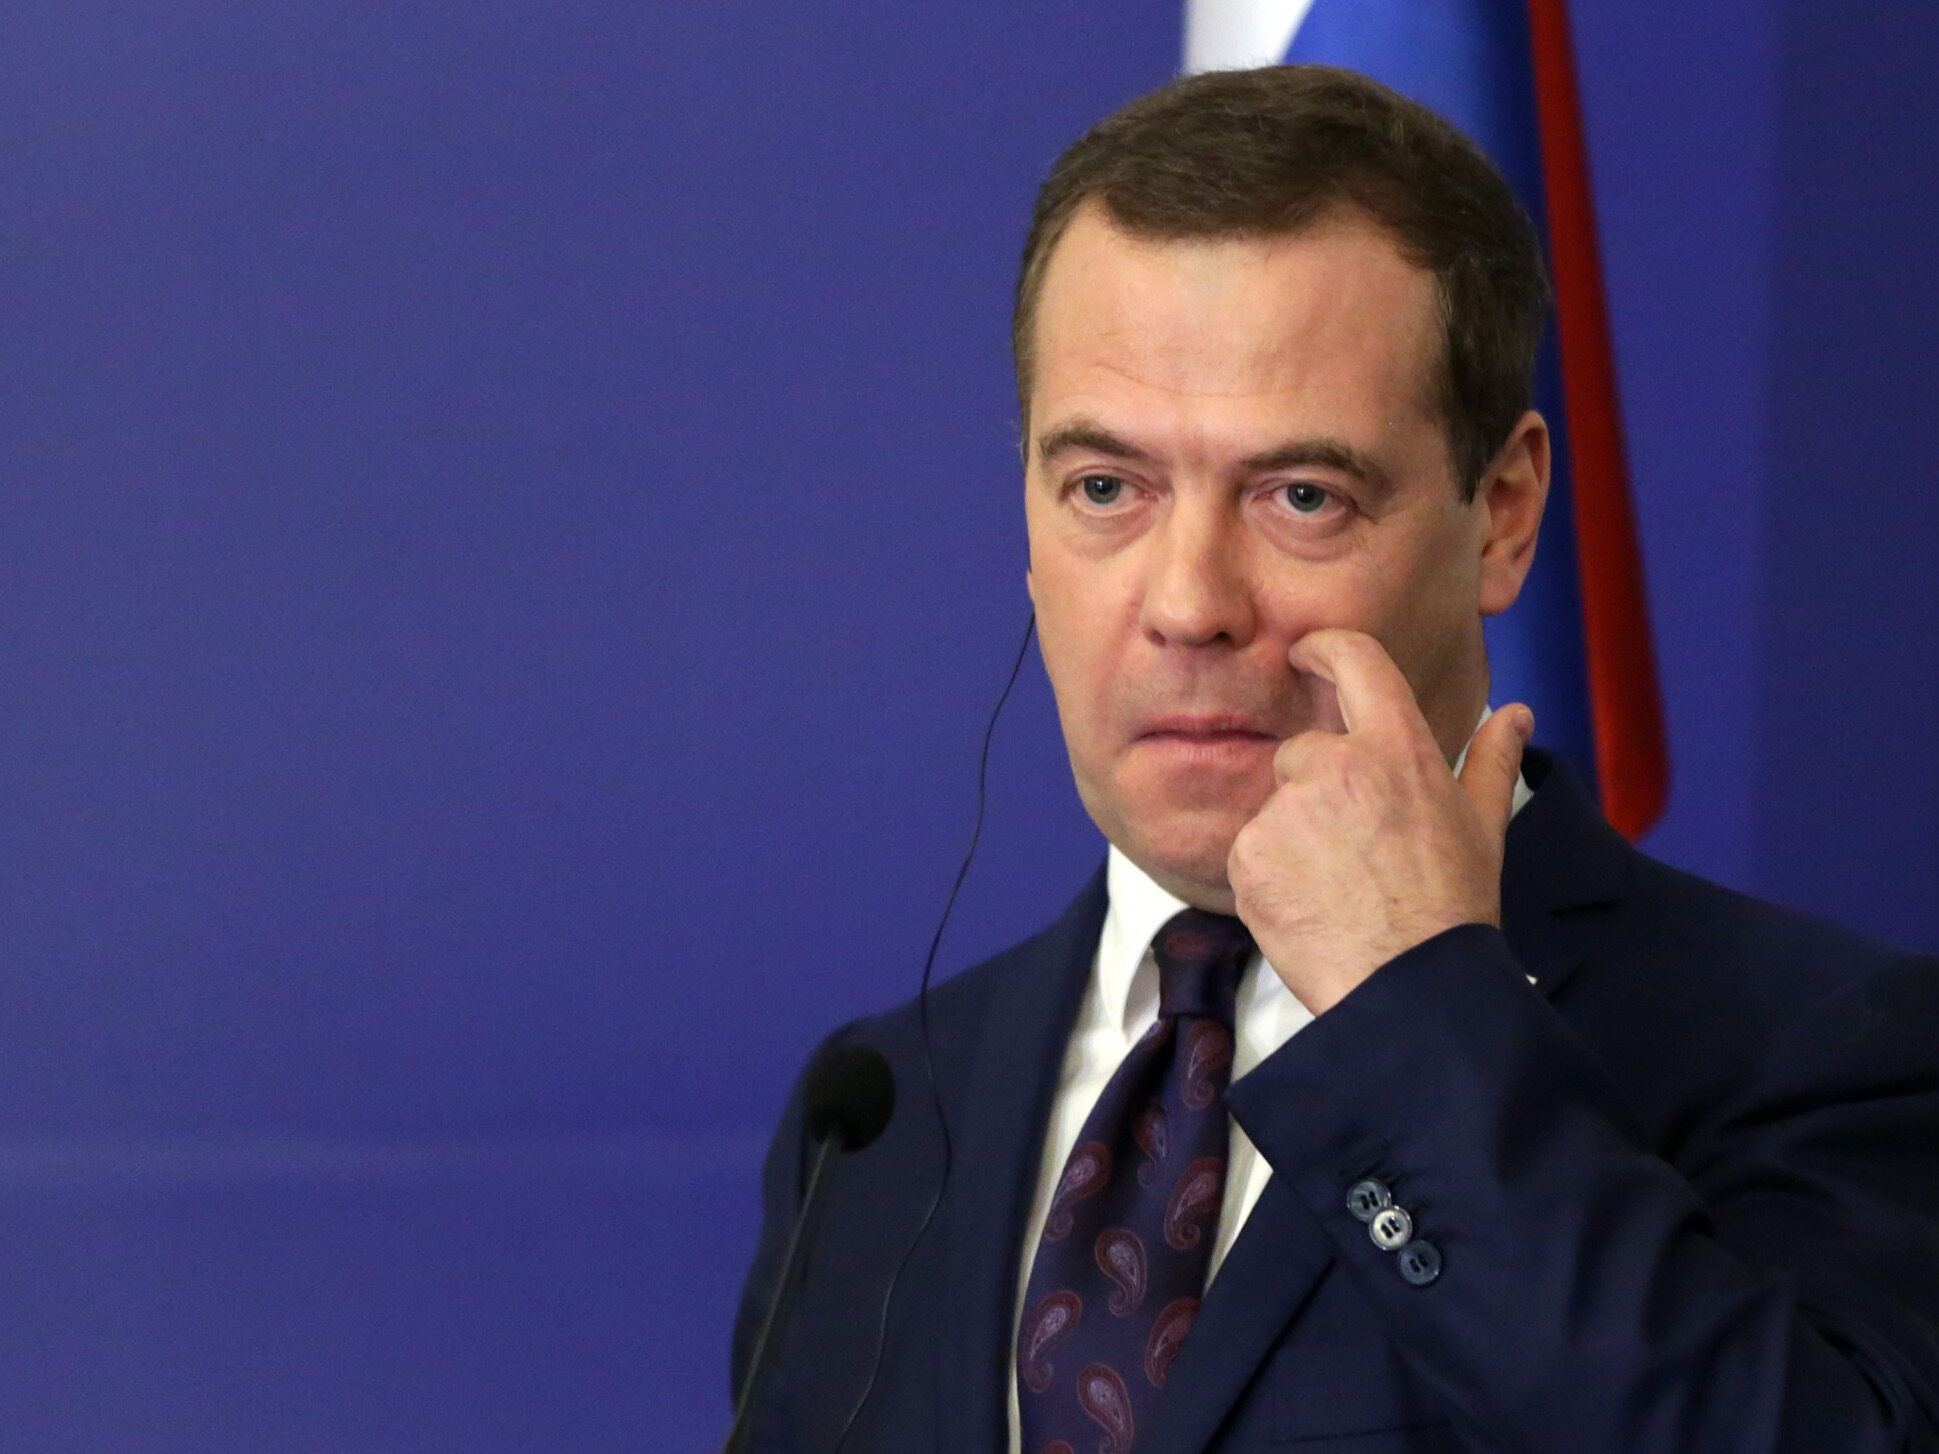 The interview with Putin shocked the West.  Medvedev's puzzling words